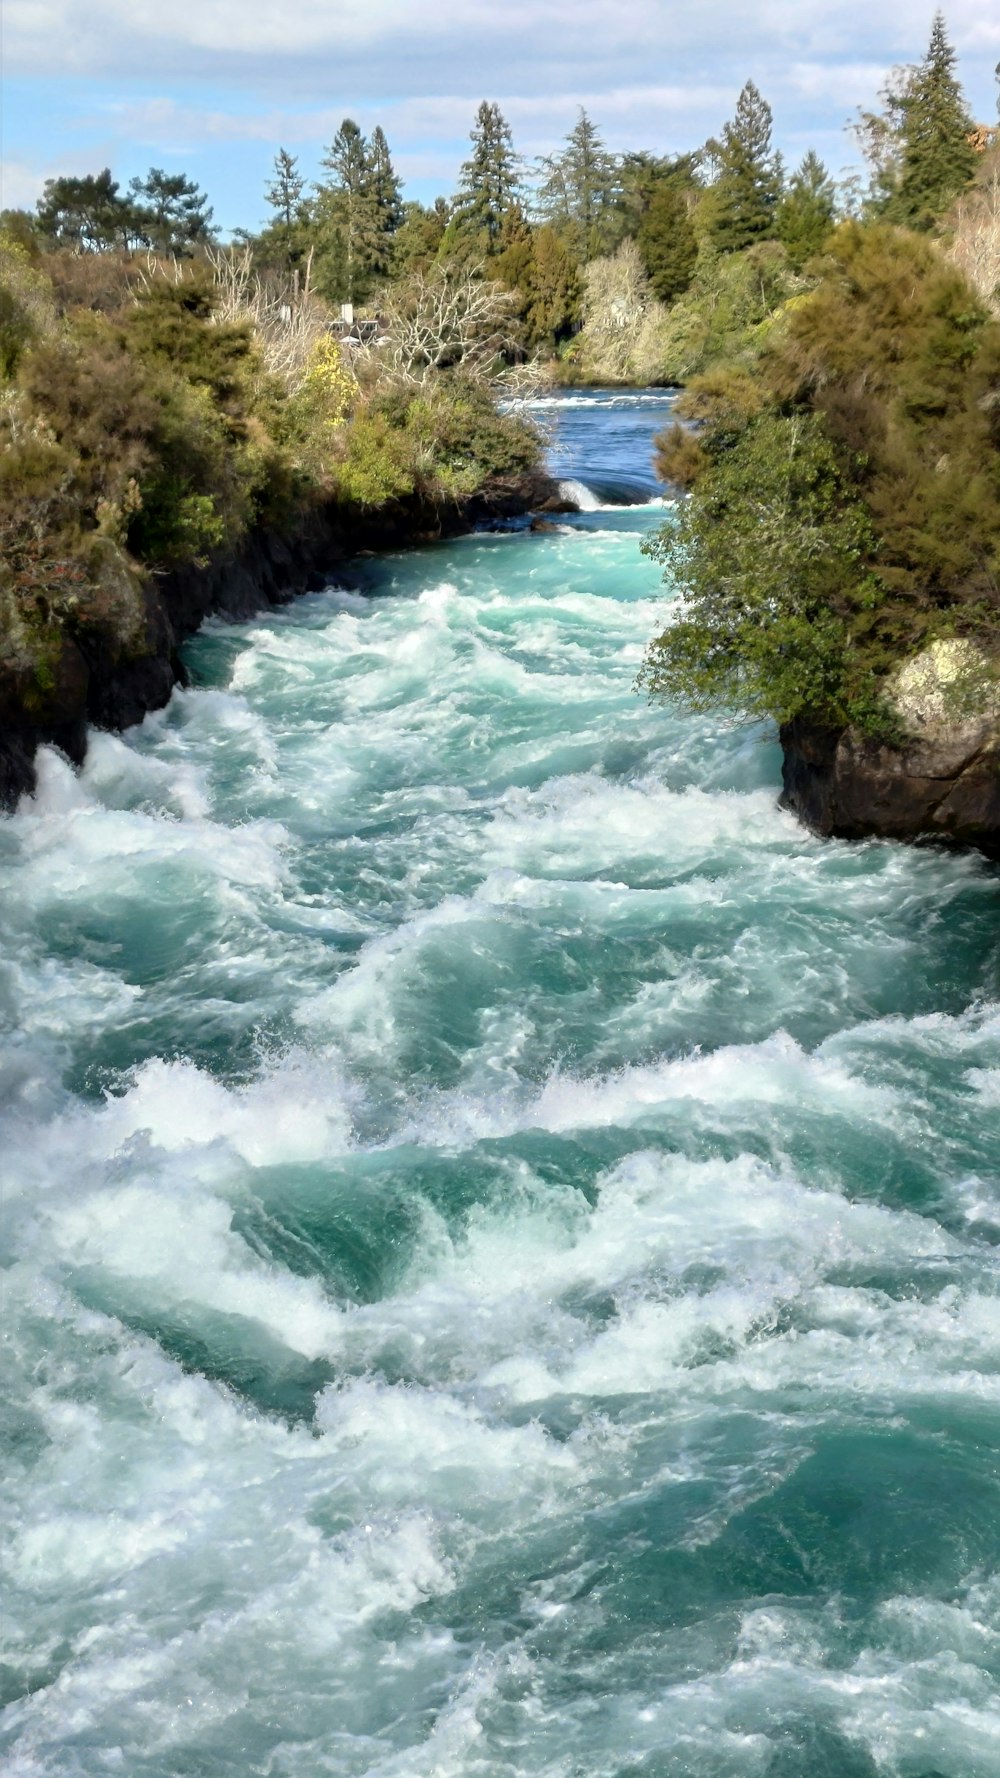 a river that has some rapids in it